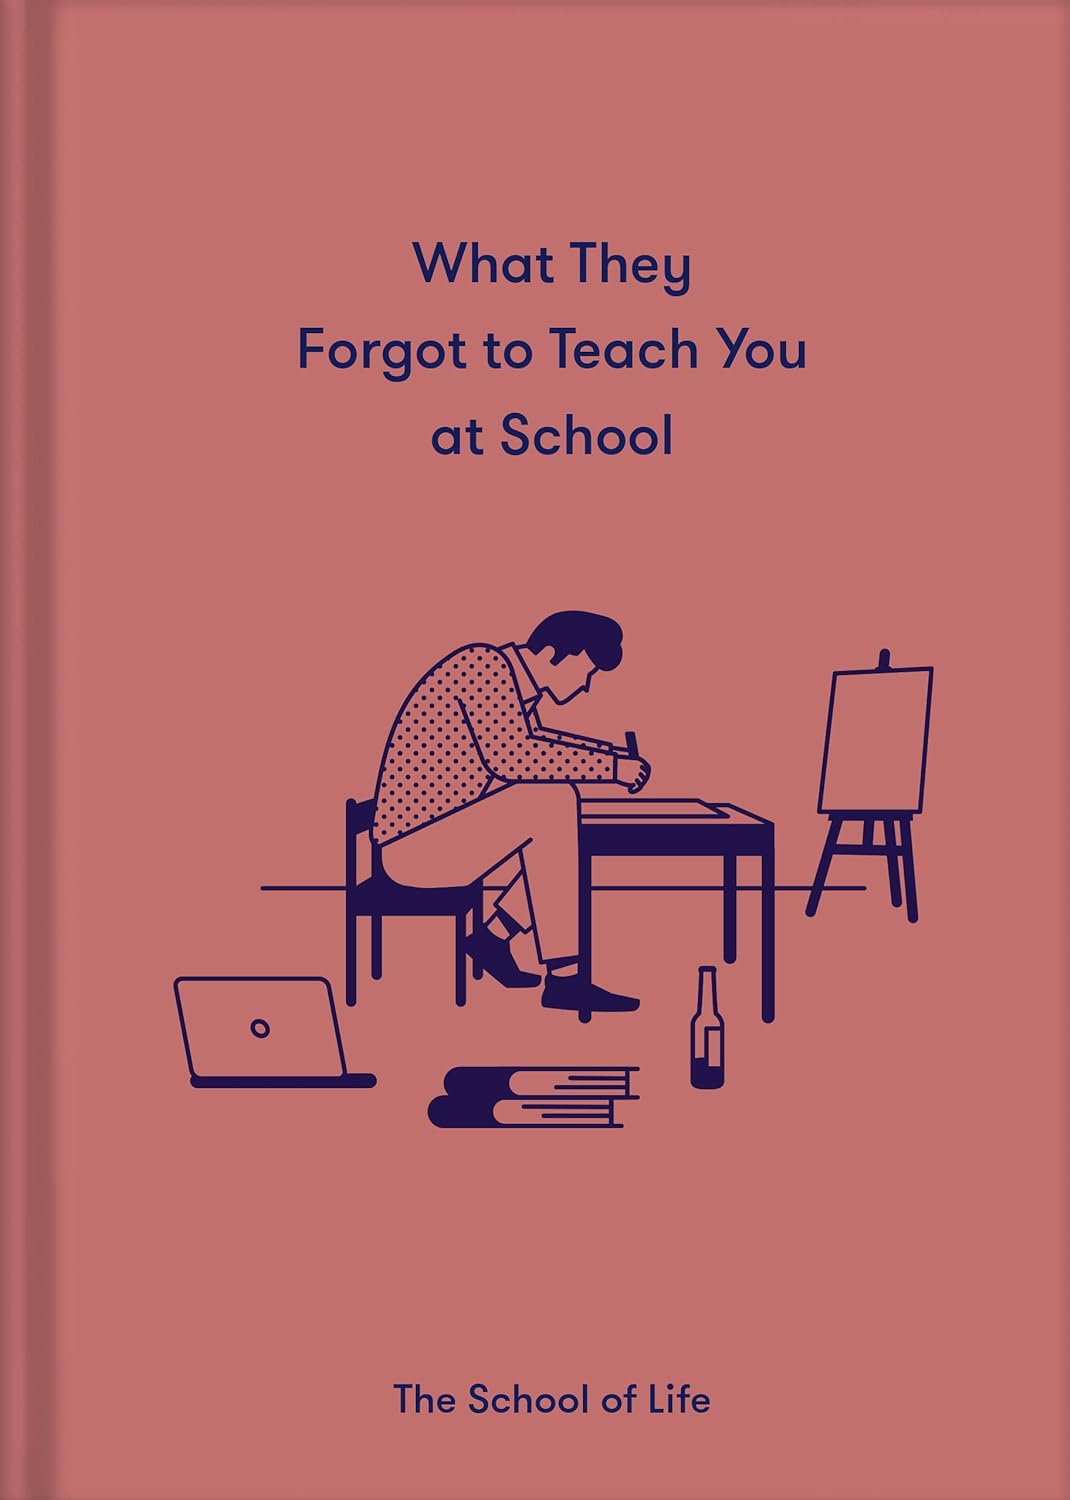 What They Forgot to Teach You in School | The School of Life